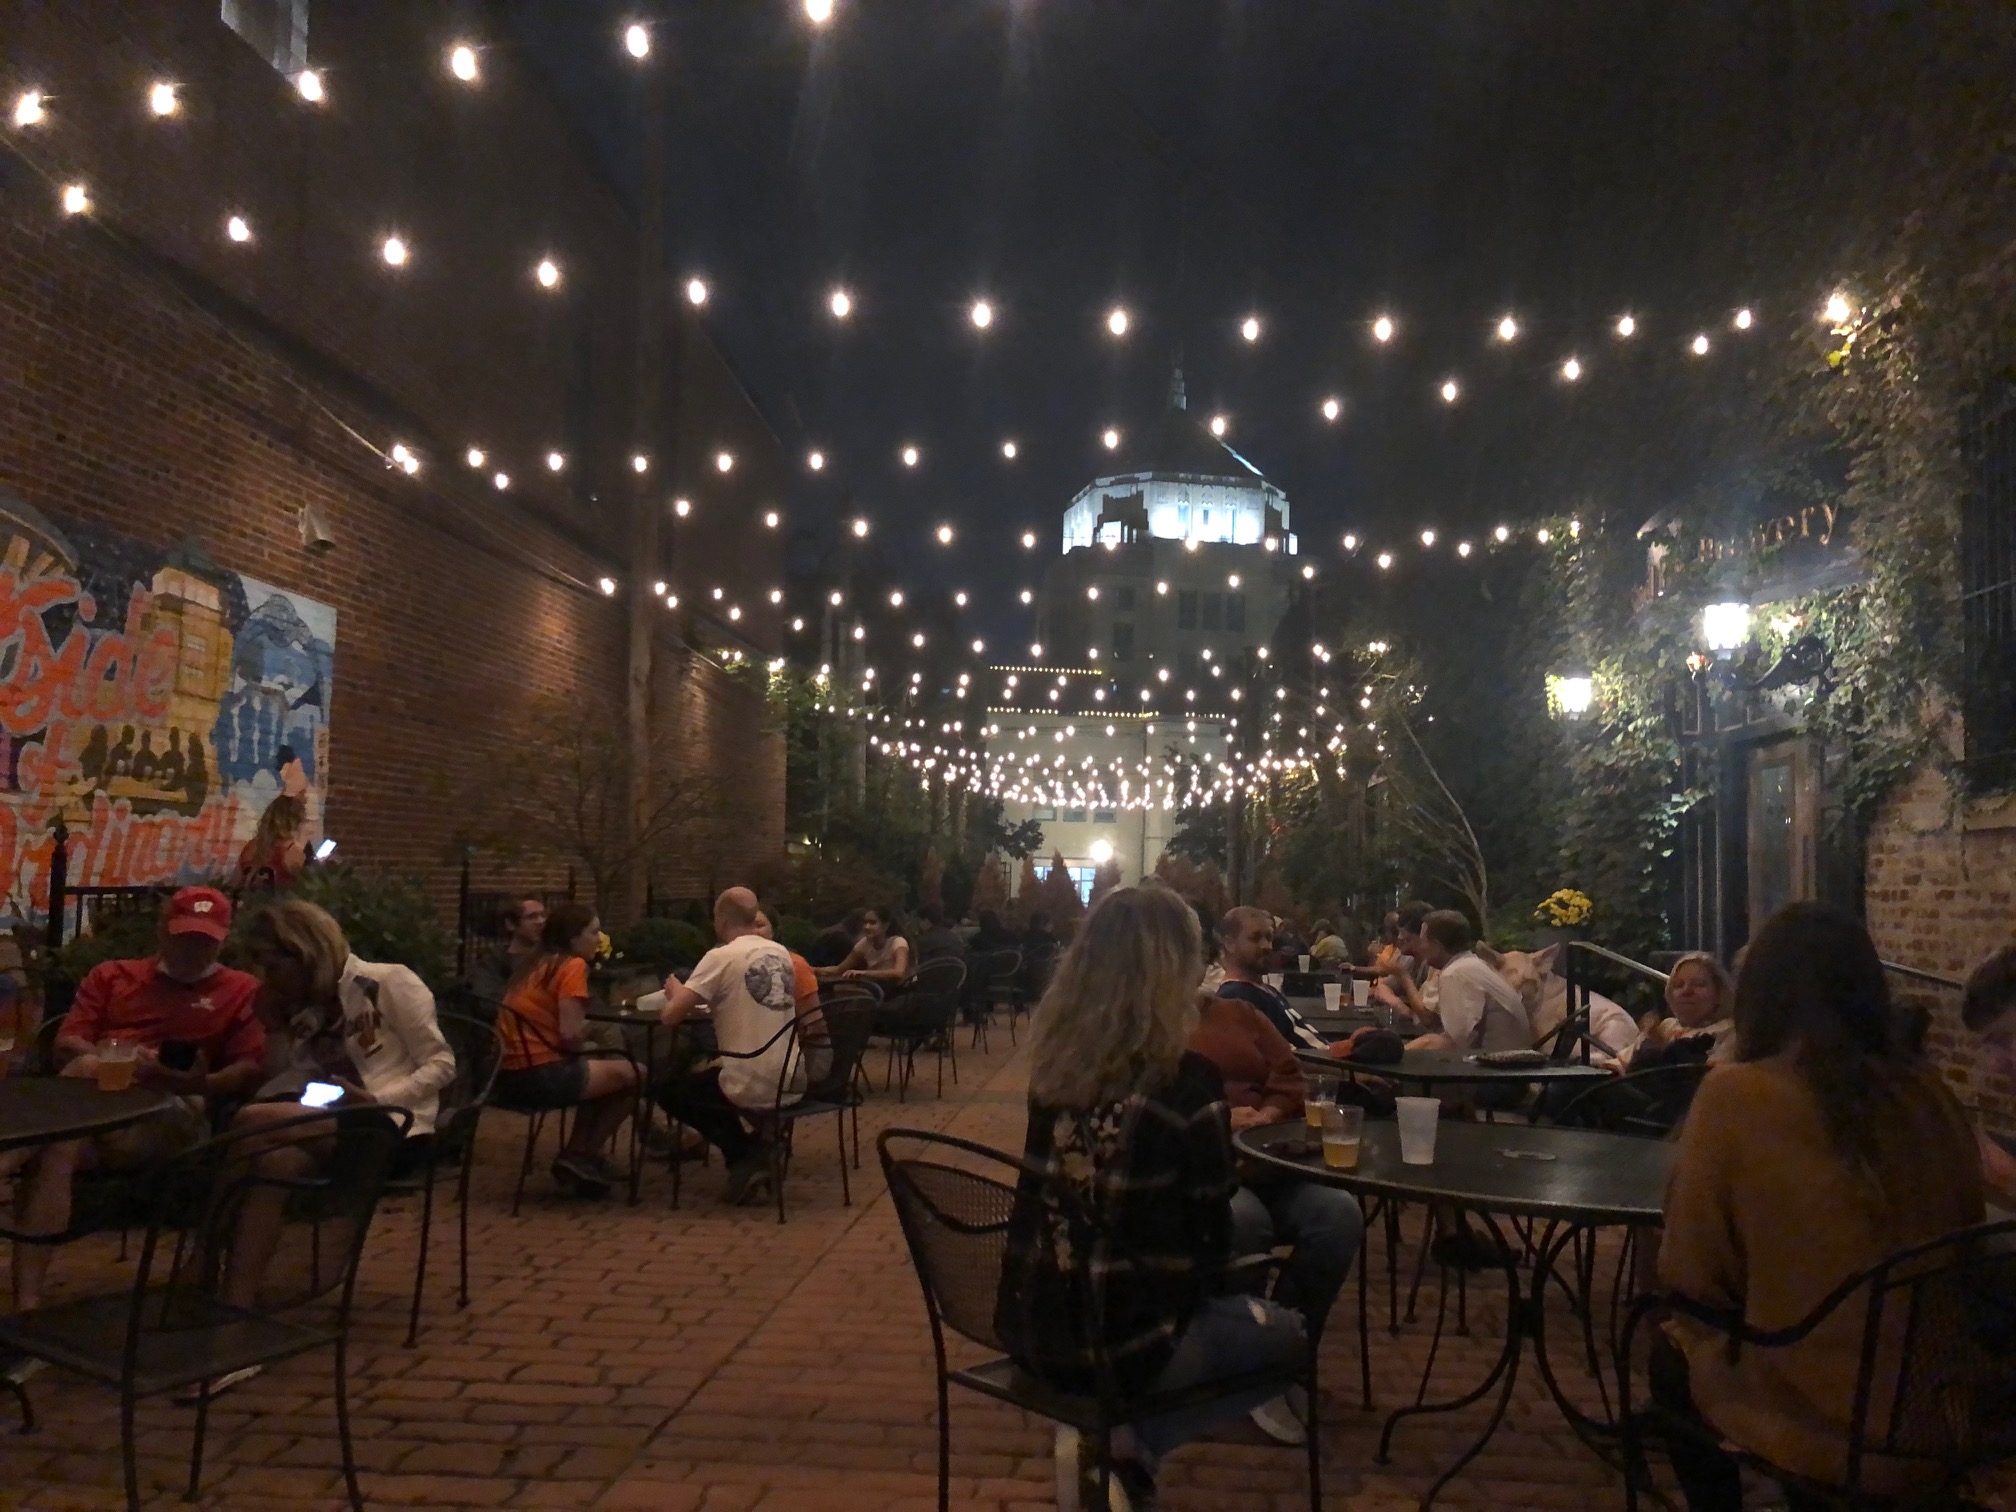 Outside at night, people enjoy drinks under string lights at Blind Pig in Downtown Champaign. Photo by Alyssa Buckley.